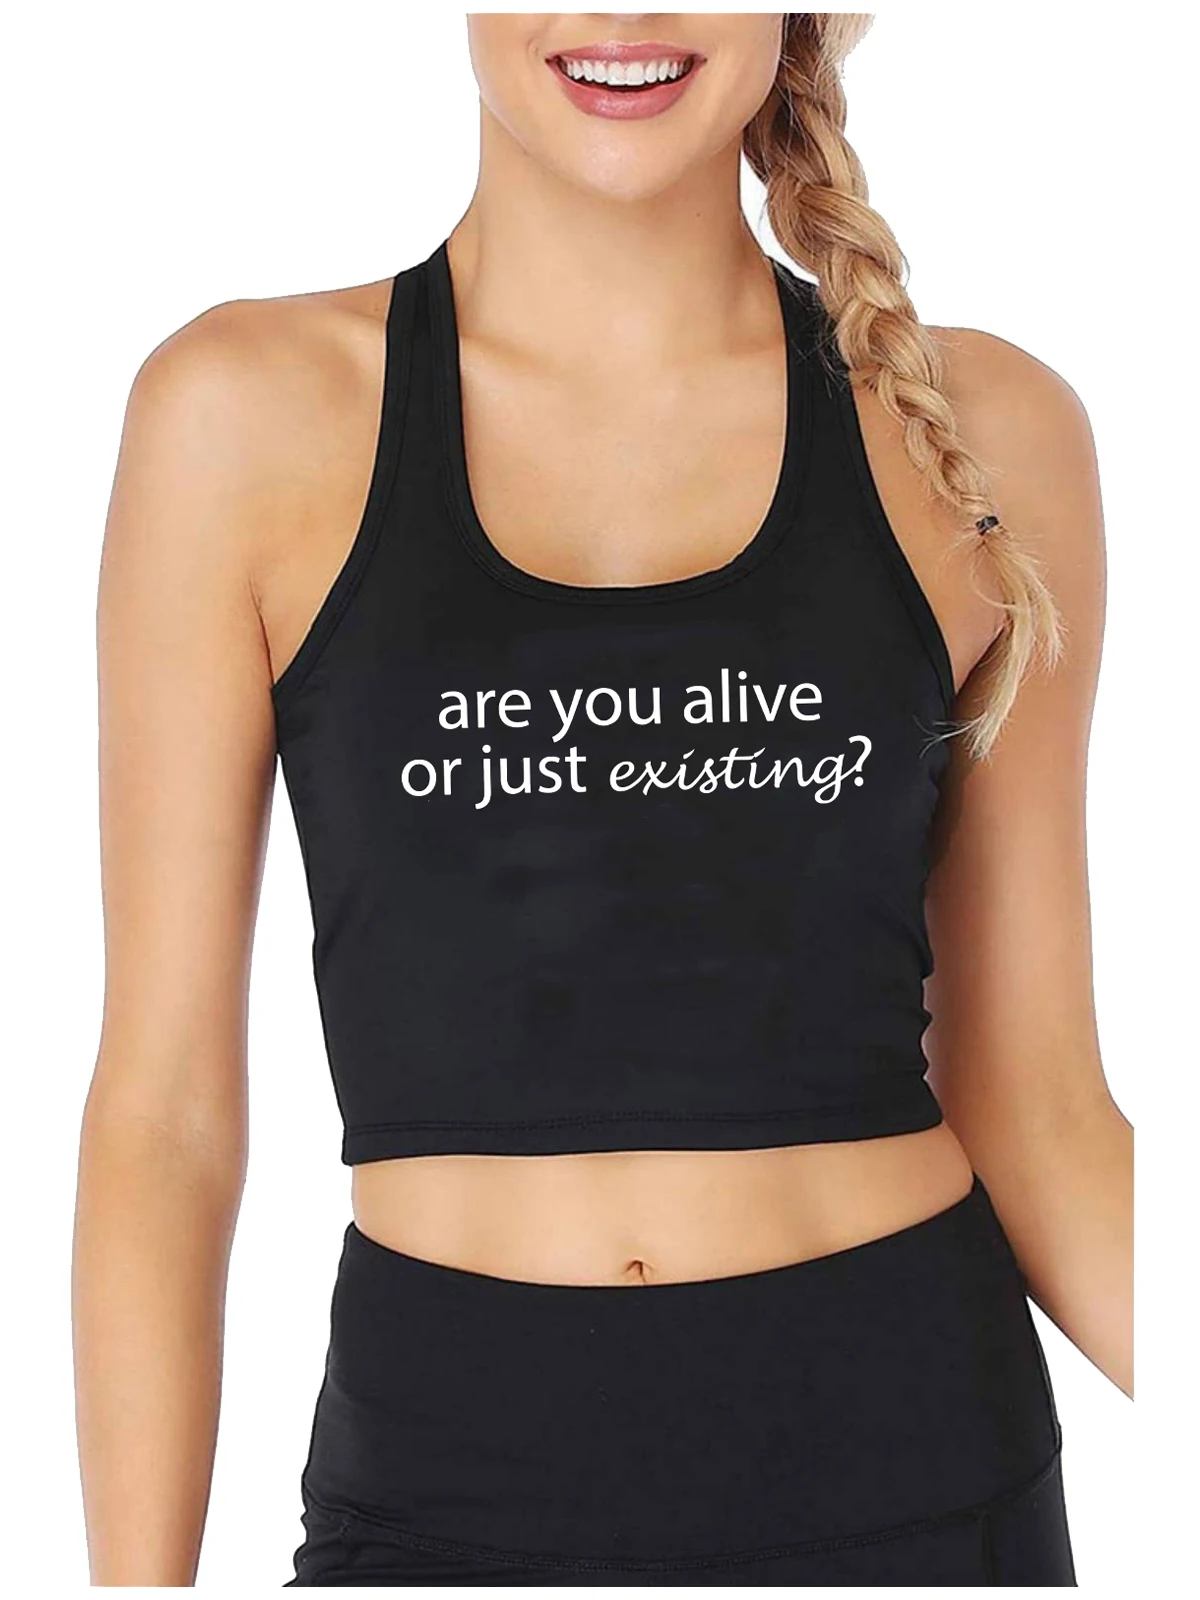 

Are You Alive Or Just Existing Text Printing Tank Tops Women Funny Sexy Naughty Crop Top Customizable Casual Training Camisole